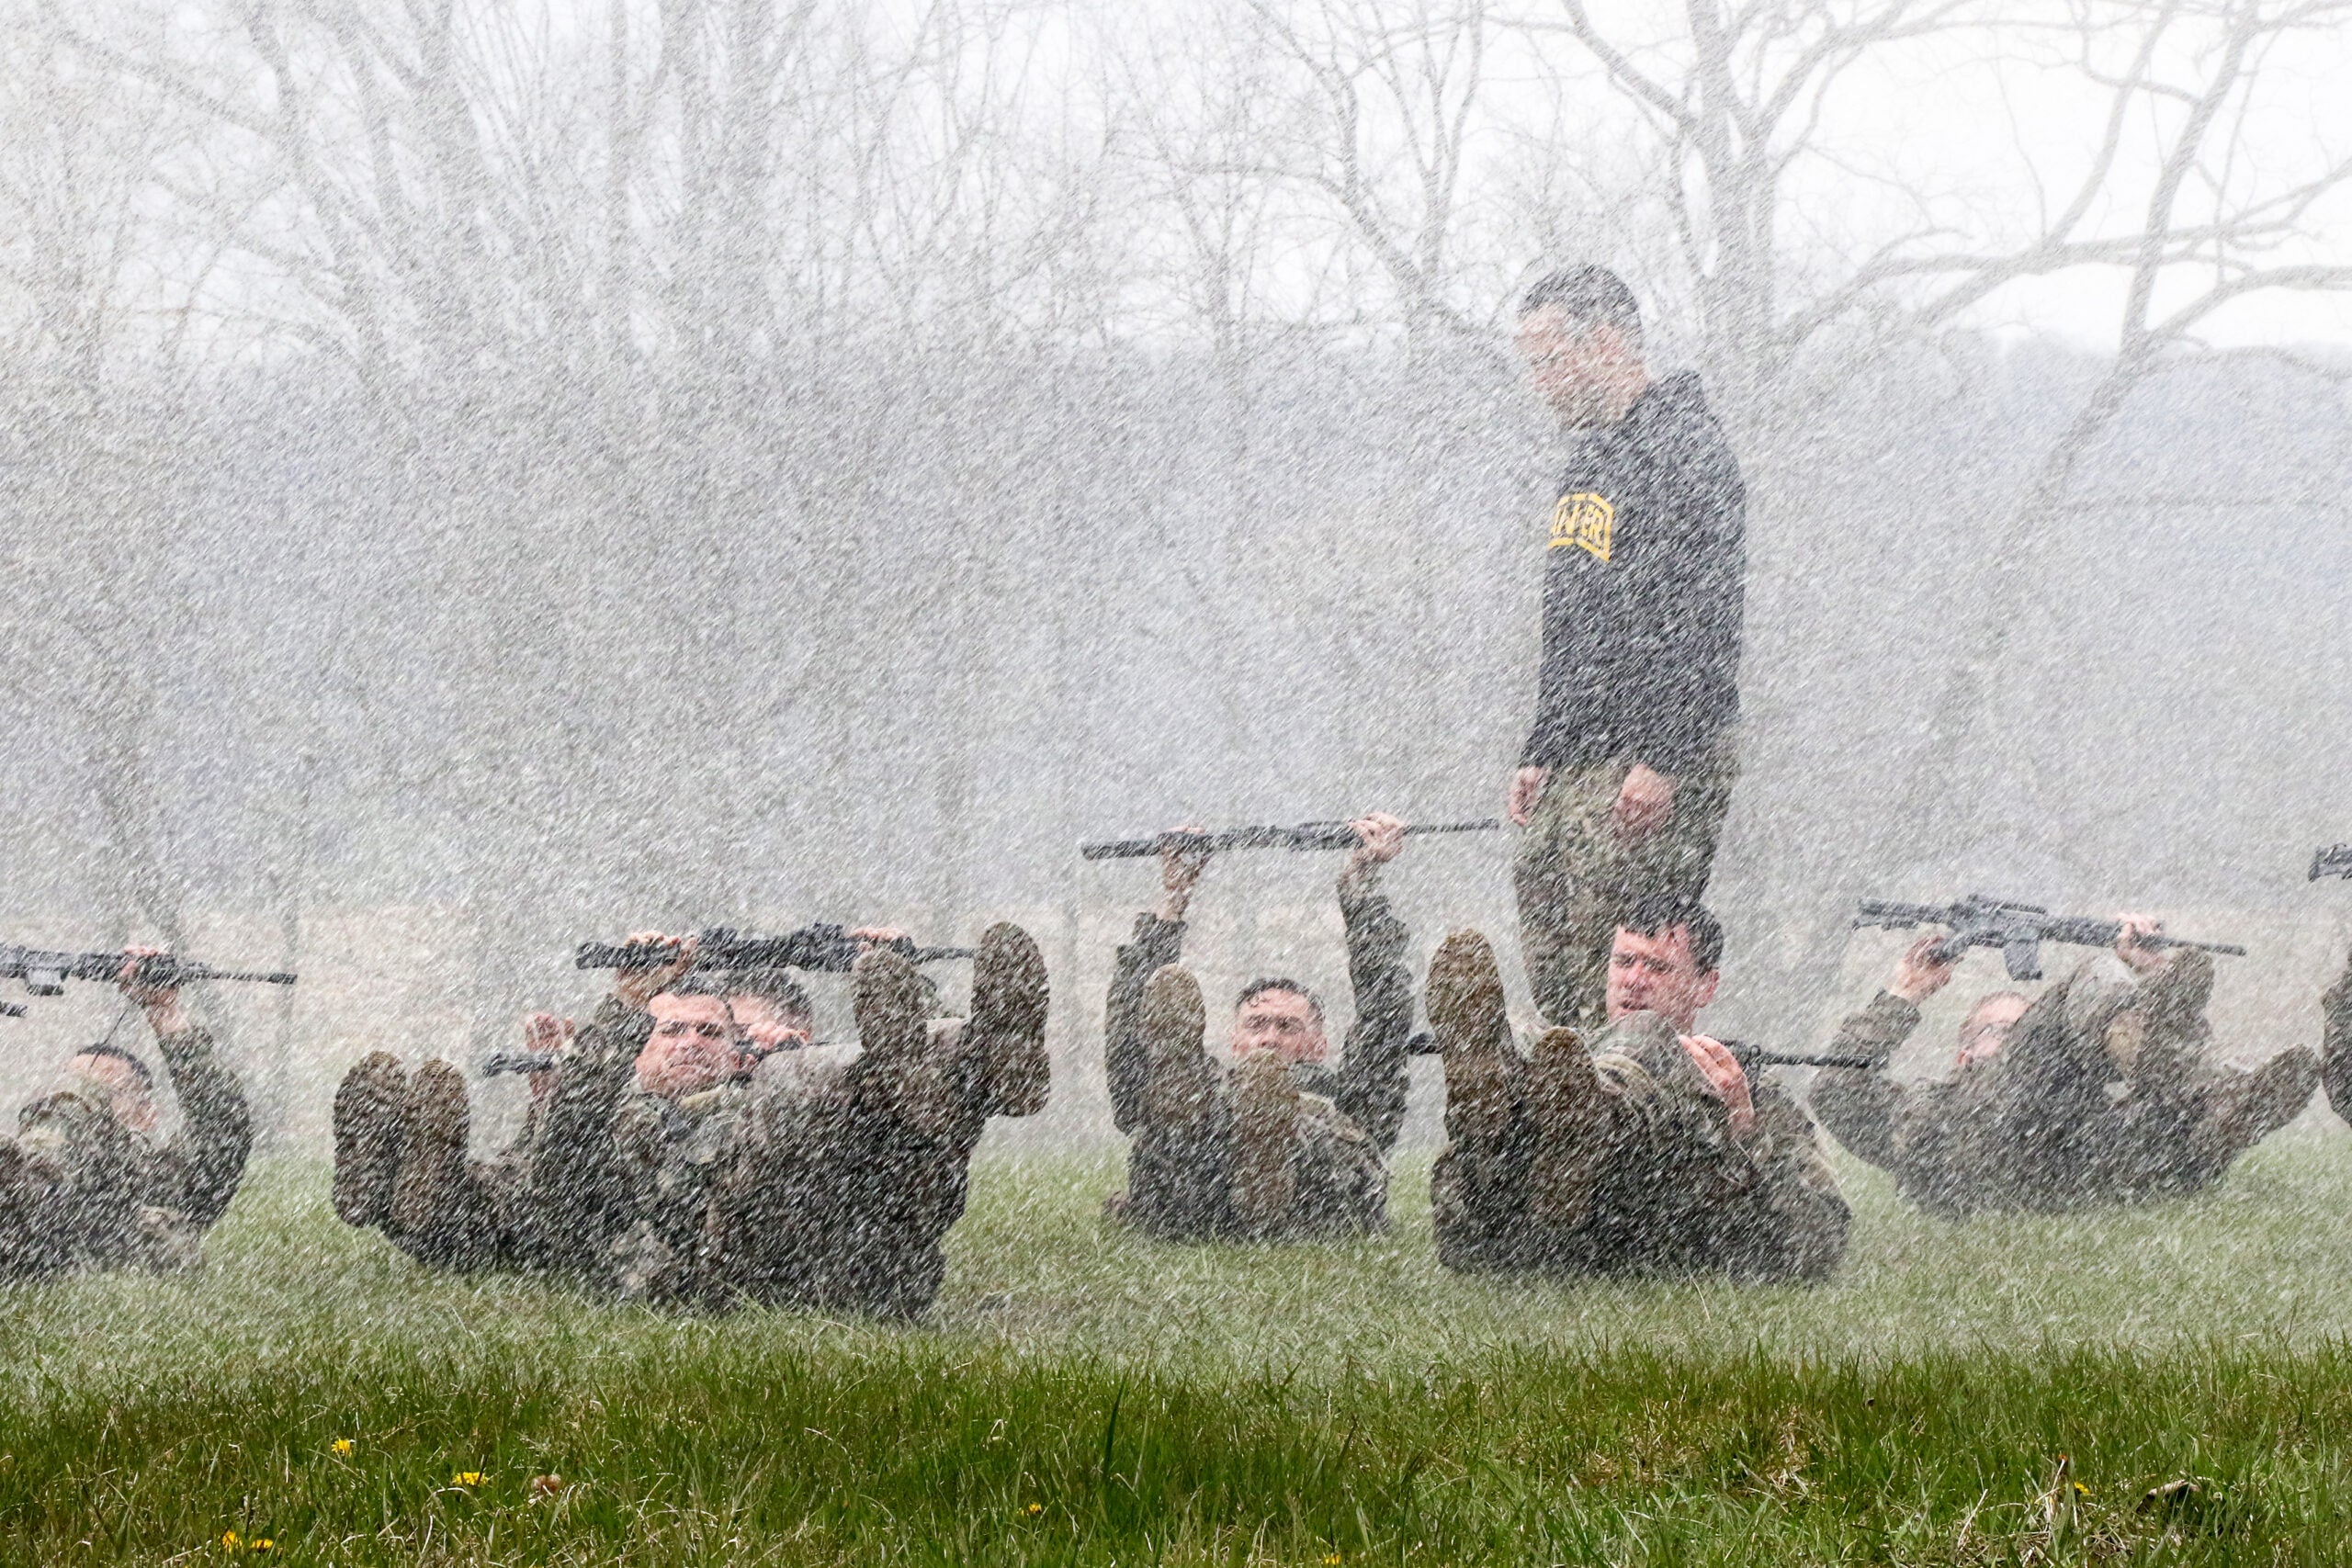 Pennsylvania National Guardsmen lie on their backs and perform flutter kicks while being drenched with water during a Ranger Sapper Assessment Program April 23 at Fort Indiantown Gap, Pa. The Fort Indiantown Gap Fire Department augmented this portion of the course training by providing a fire truck with a bumper turret spray system, which was used to soak trainees as they moved through an individual movement technique lane, performed ranger training tasks, and were pushed to their absolute limits both physically and mentally. This event was designed to prepare them for the infamous Malvesti obstacle course, a wet and muddy confidence course that they will encounter if selected to attend Ranger School. (U.S. Army National Guard photo by Staff Sgt. Shane Smith)